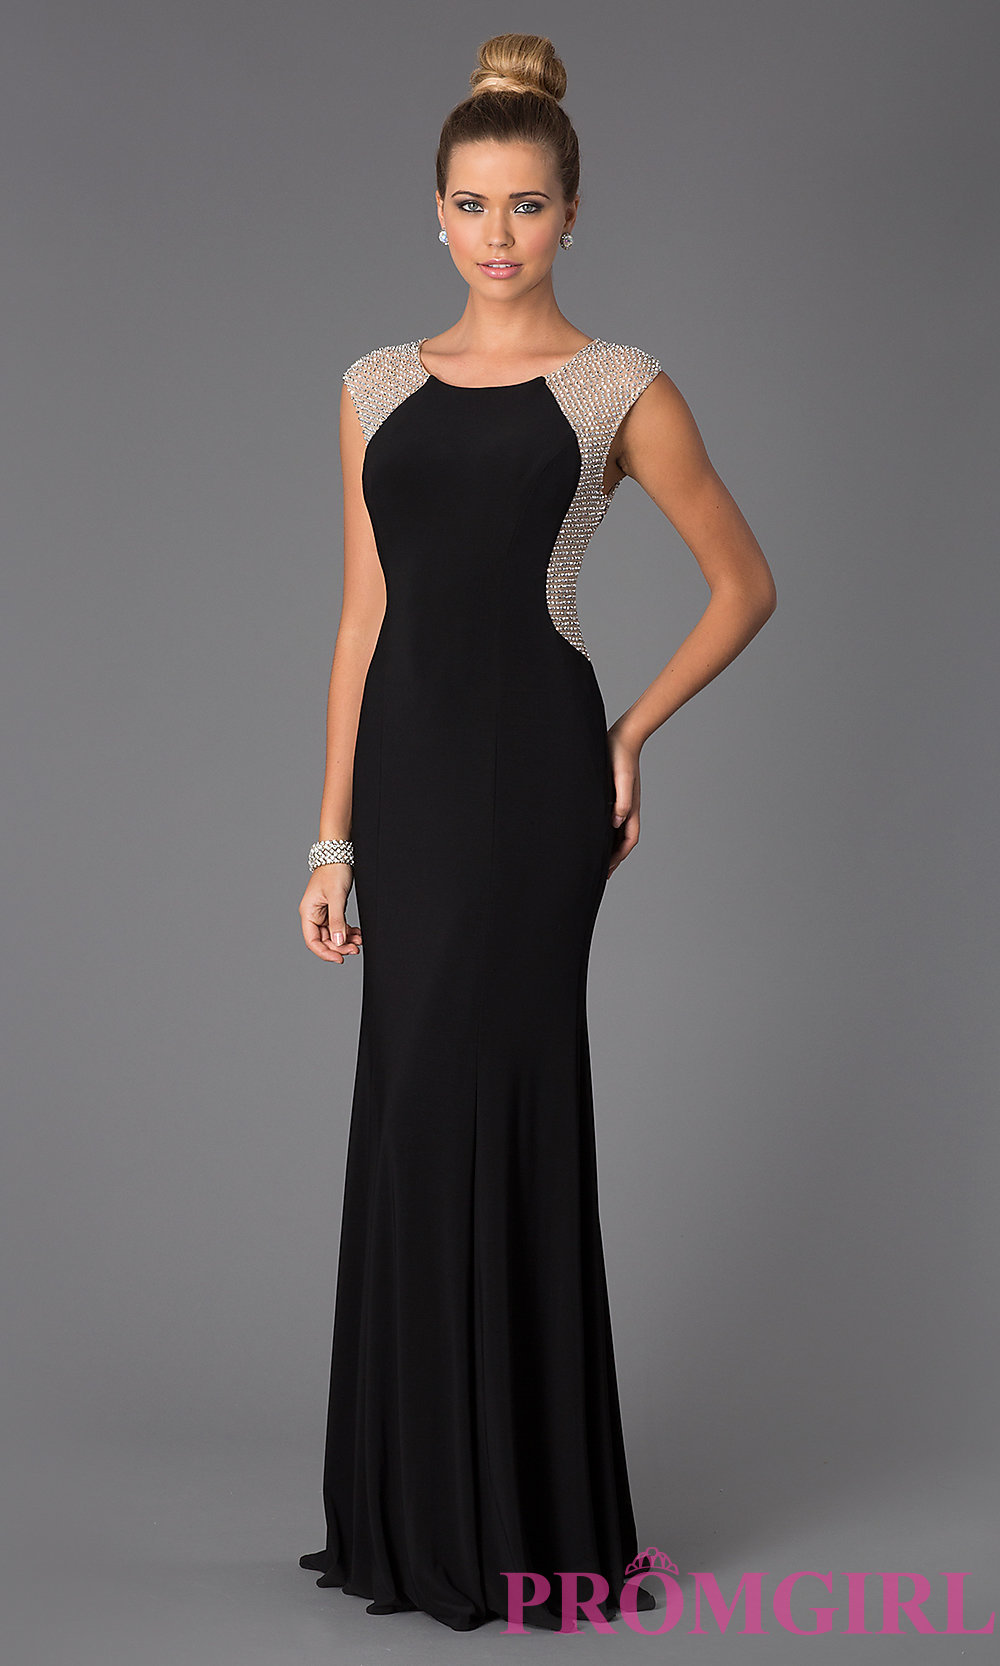 black evening dresses hover to zoom XFKLWVO